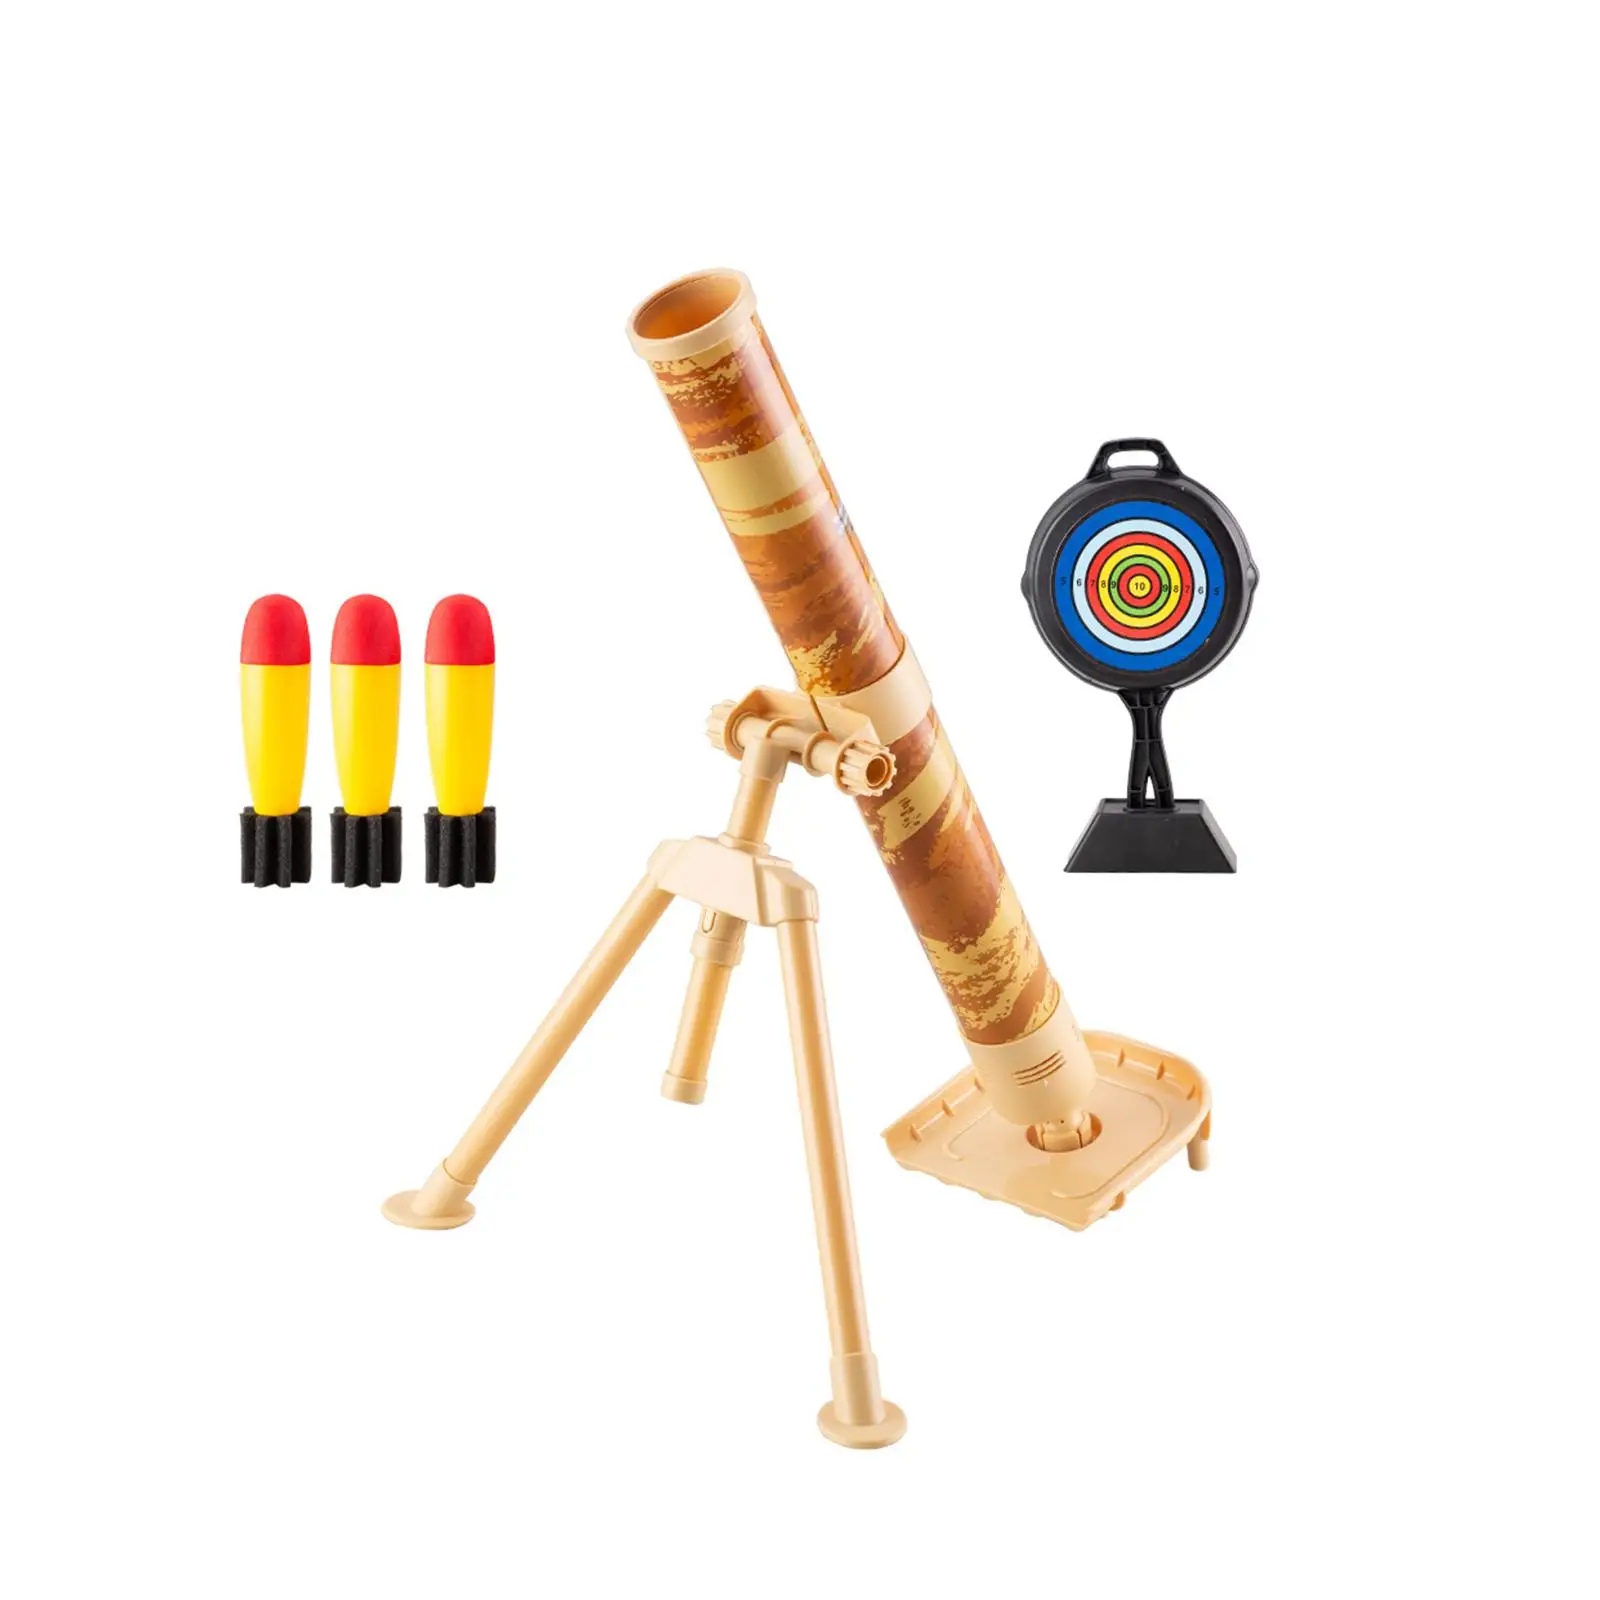 Mortar Launcher Toy Game Kits Launch Set for Kid Festival Gifts